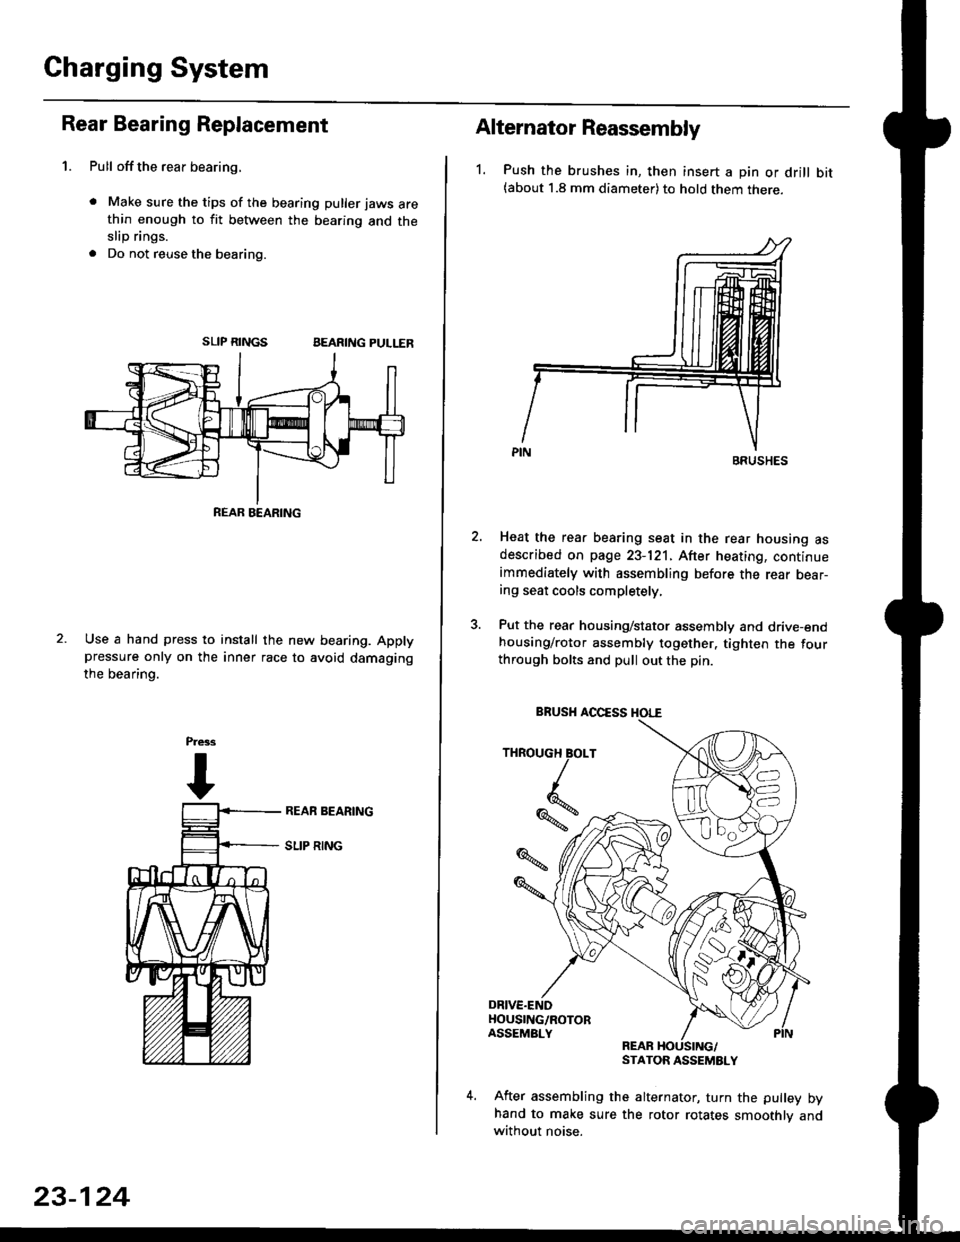 HONDA CIVIC 1999 6.G Workshop Manual Gharging System
Rear Bearing Replacement
1. Pull offthe rear bearing,
. Make sure the tips of the bearing puller jaws arethin enough to fit between the bearing and theslip rings.
. Do not reuse the be